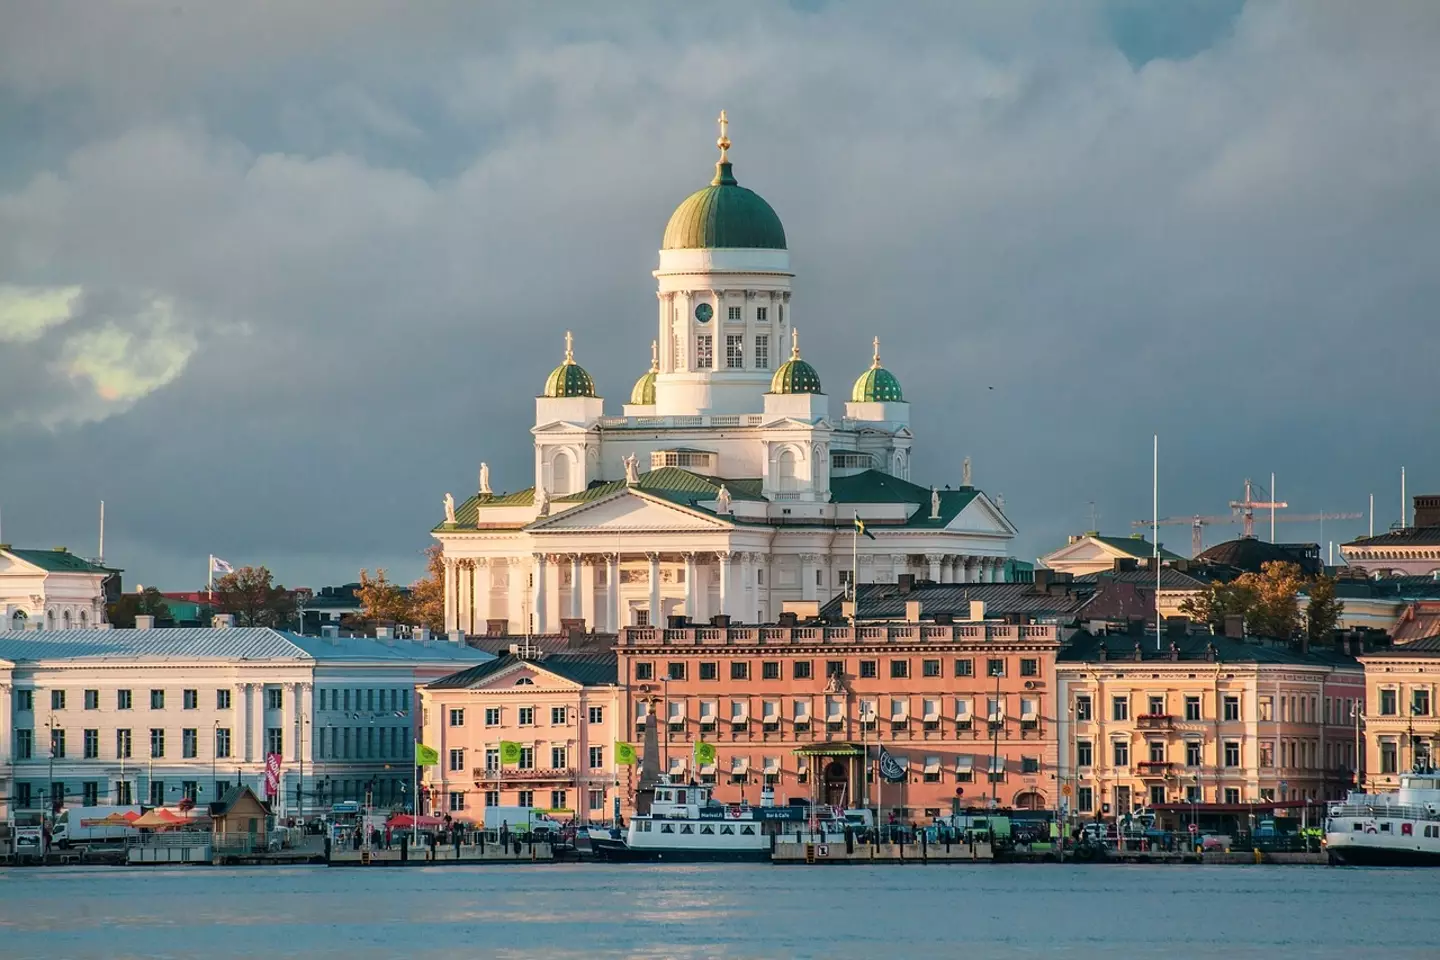 Helsinki is the capital of Finland, ranked the happiest country in the world for nearly a decade.